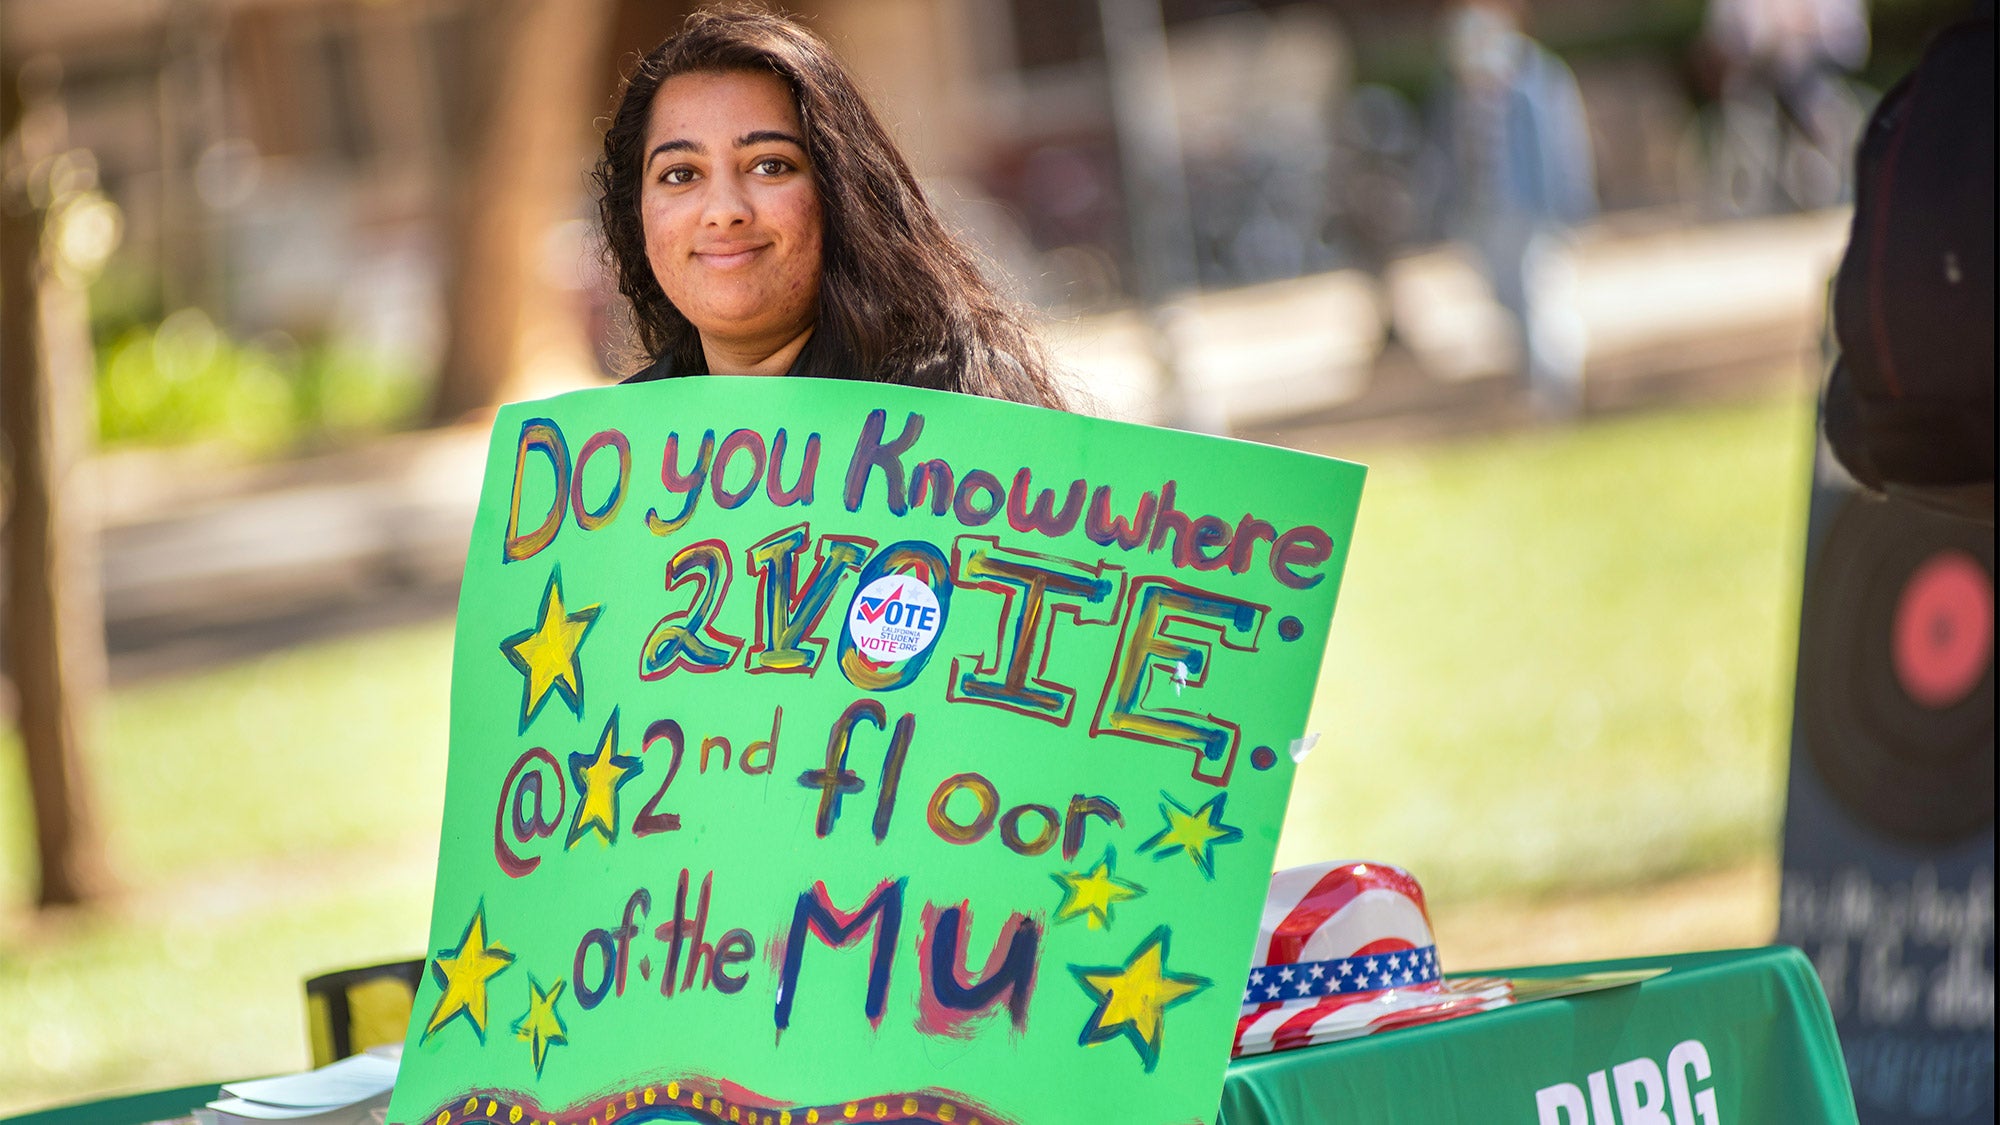 Student holds sign reading "Do you know where 2vote? @ 2nd floor of the MU"